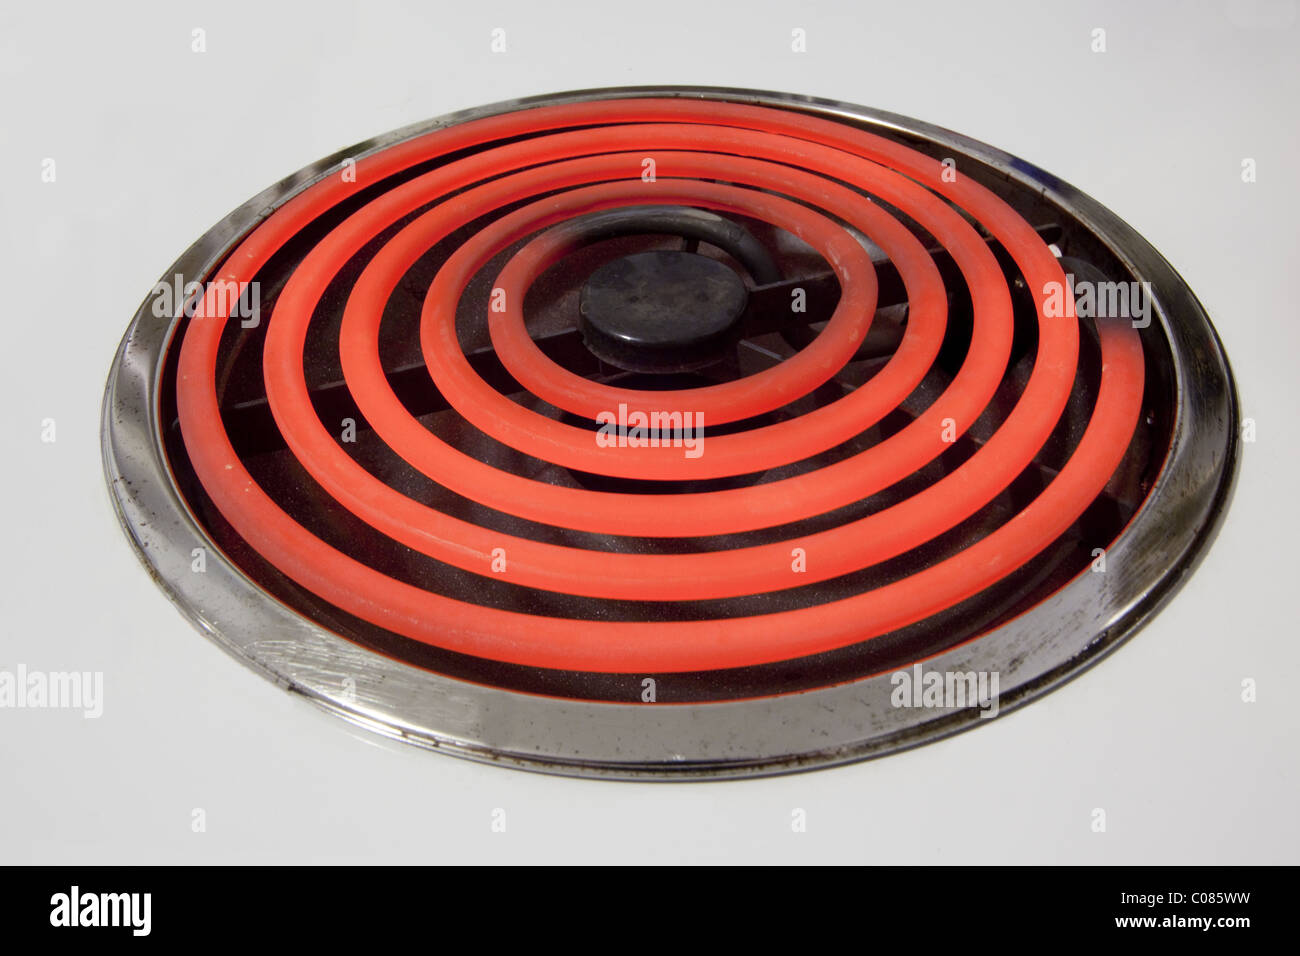 https://c8.alamy.com/comp/C085WW/red-hot-coiled-burner-on-a-stovetop-C085WW.jpg